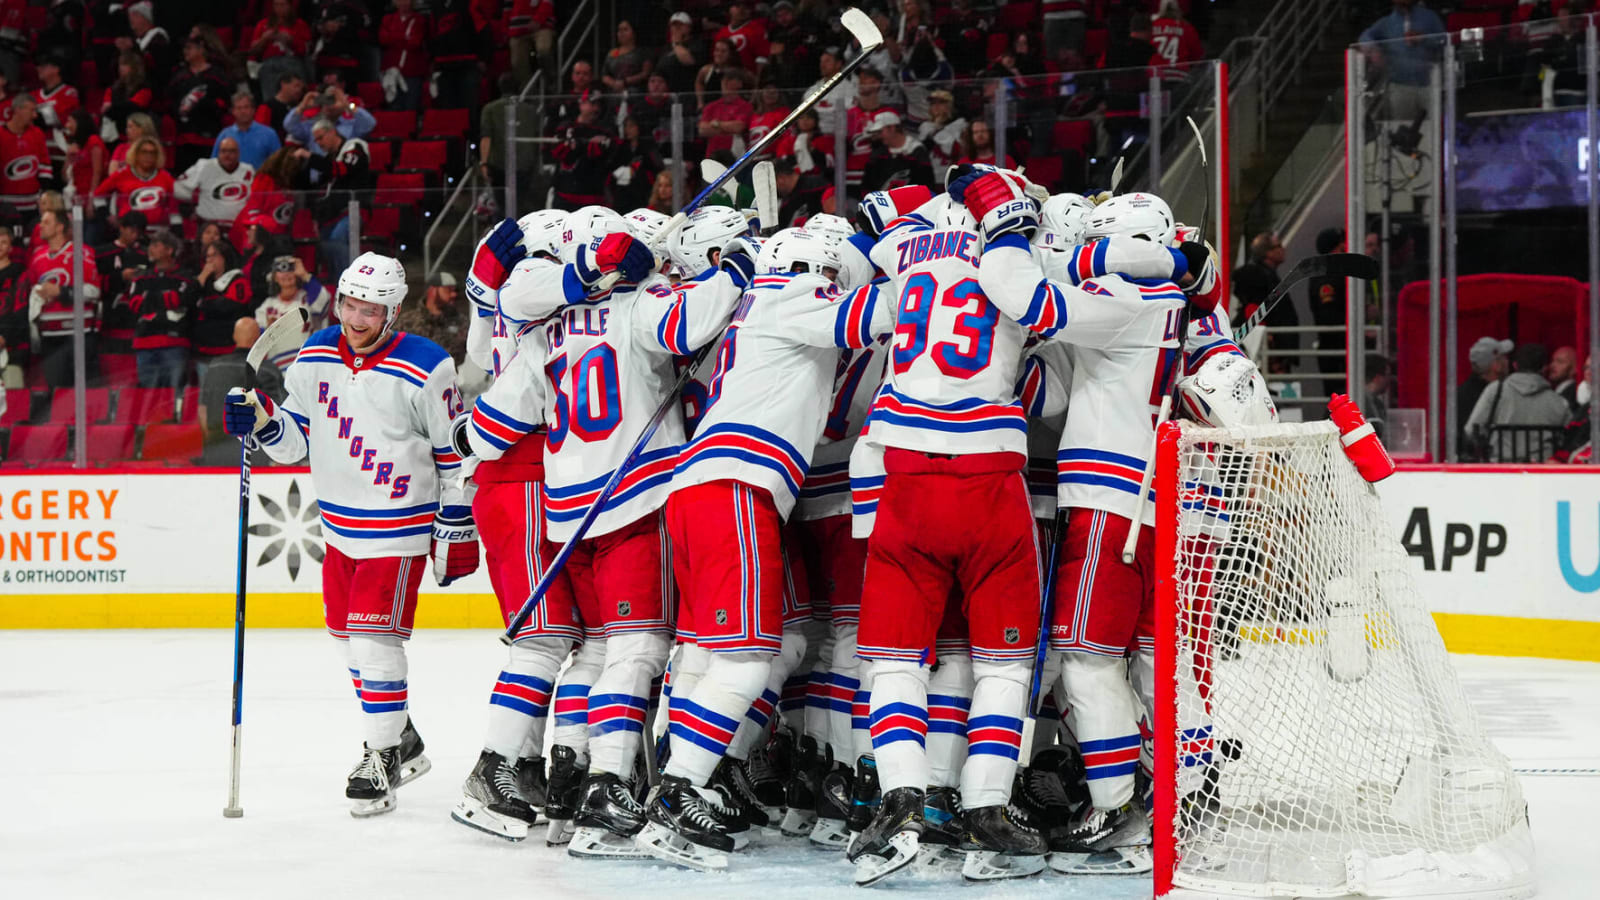 Former NHLer: Panthers-Rangers series will be 'heated, emotional'